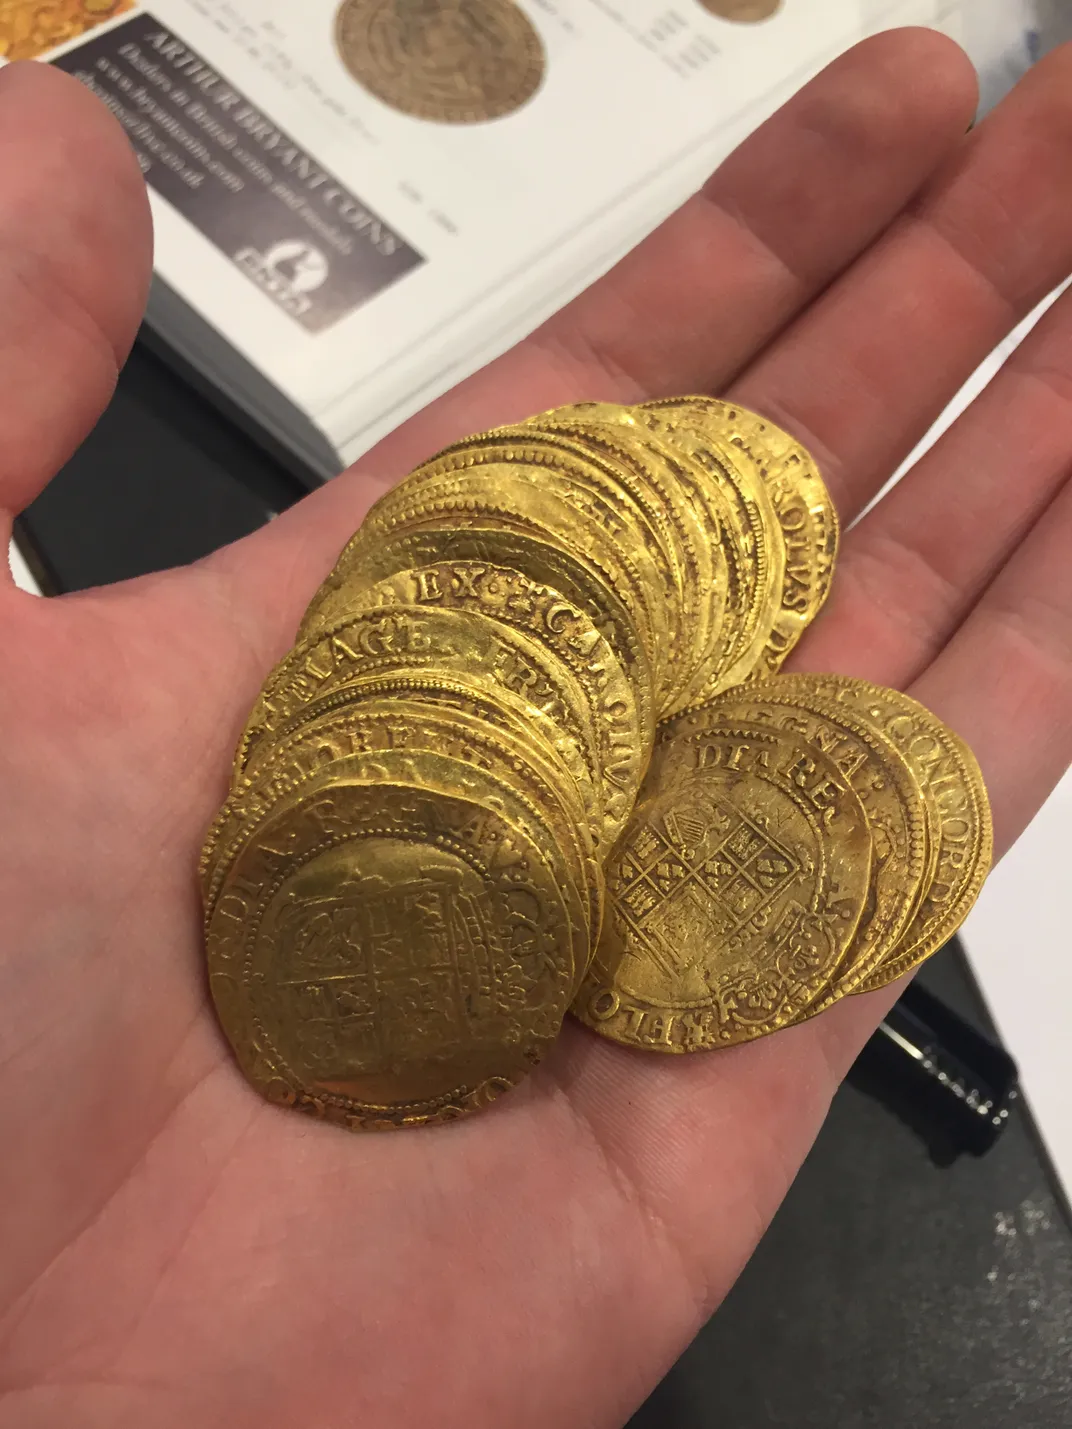 Some of the gold coins